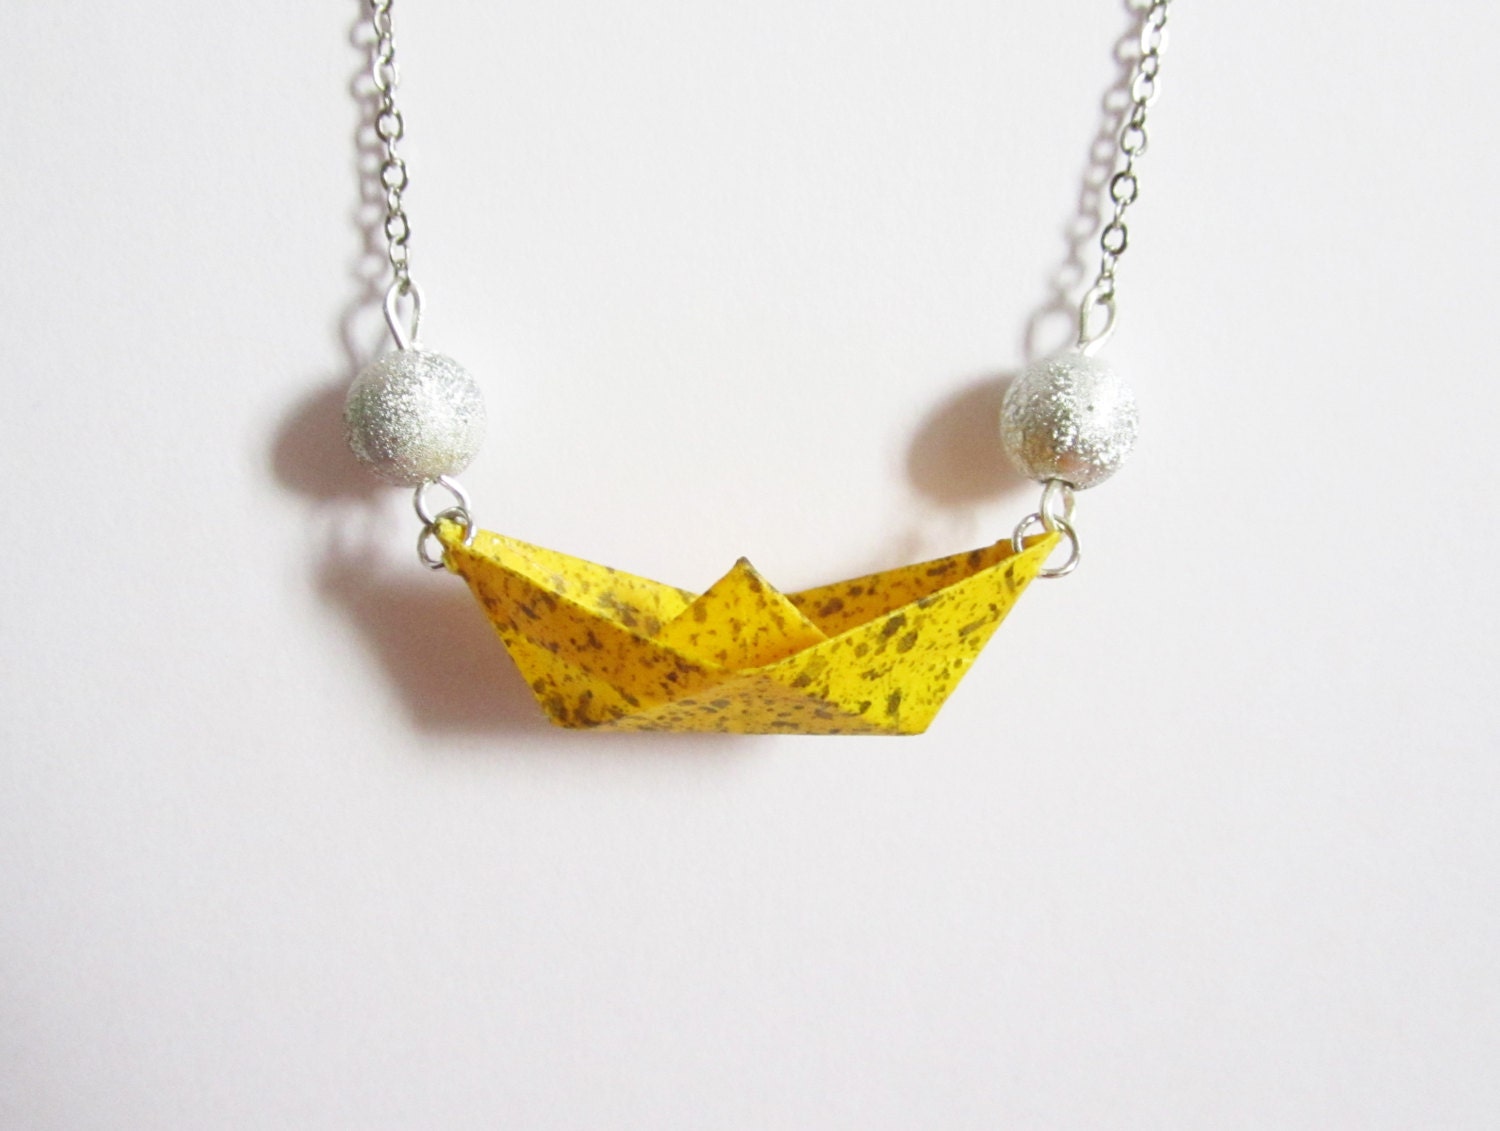 Handpainted paper boat necklace - ichimo